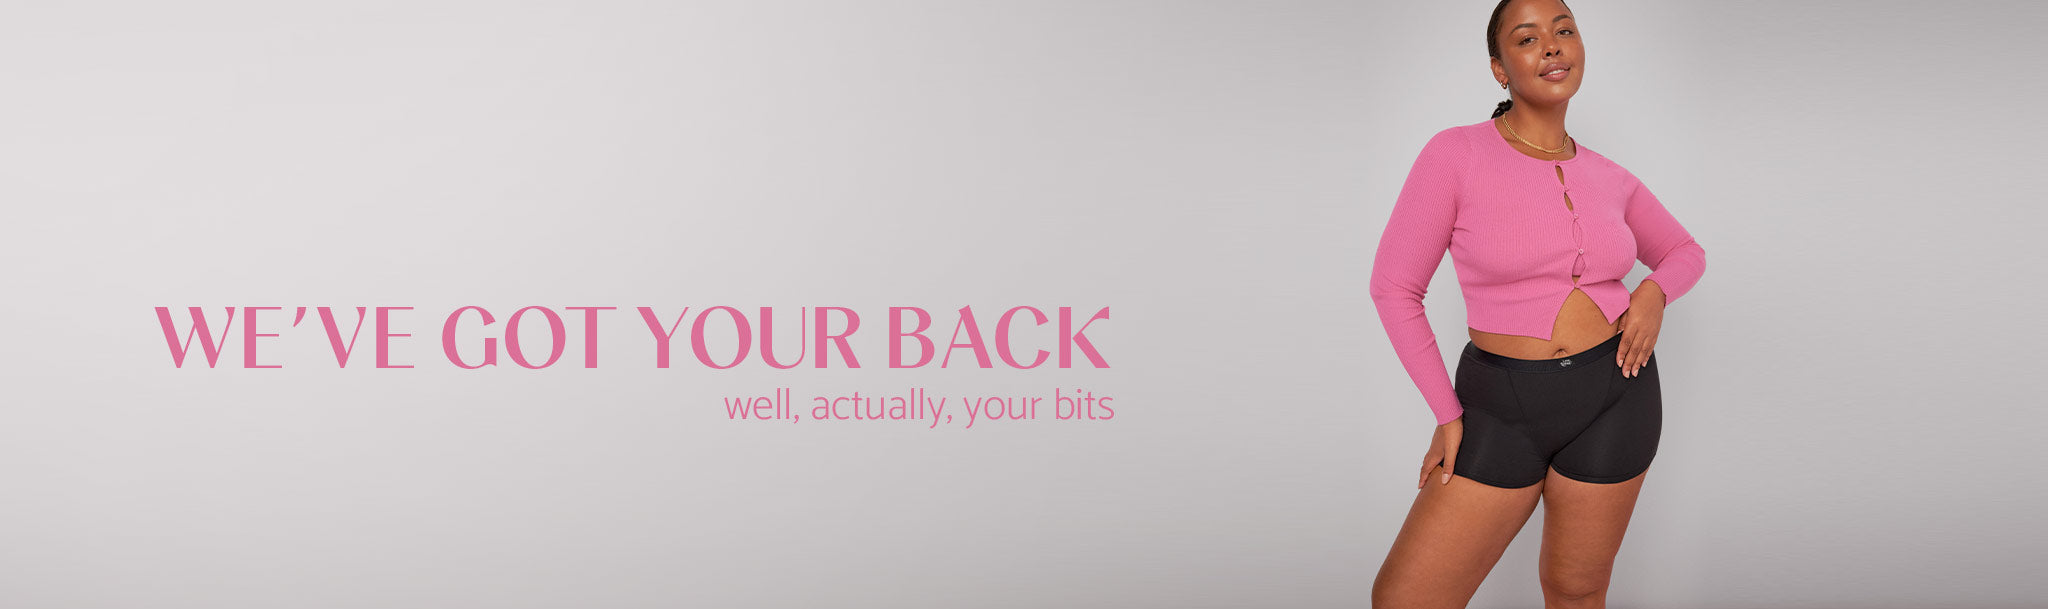 we've got your back, well, actually, your bits